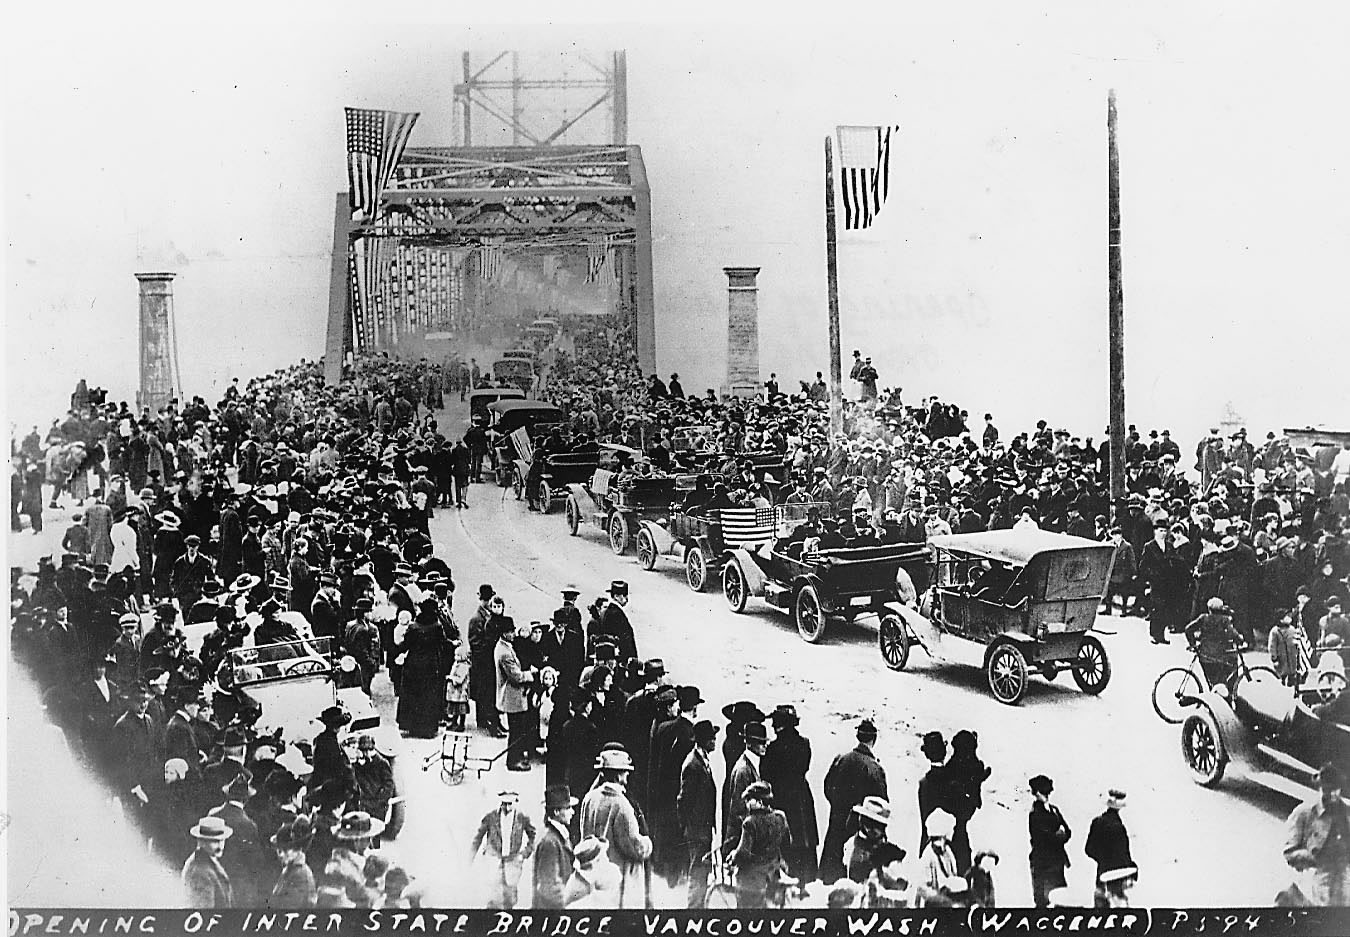 One of the biggest days in Clark County history was Feb. 14, 1917, when a ribbon was cut opening the Interstate Bridge between Vancouver and Portland.